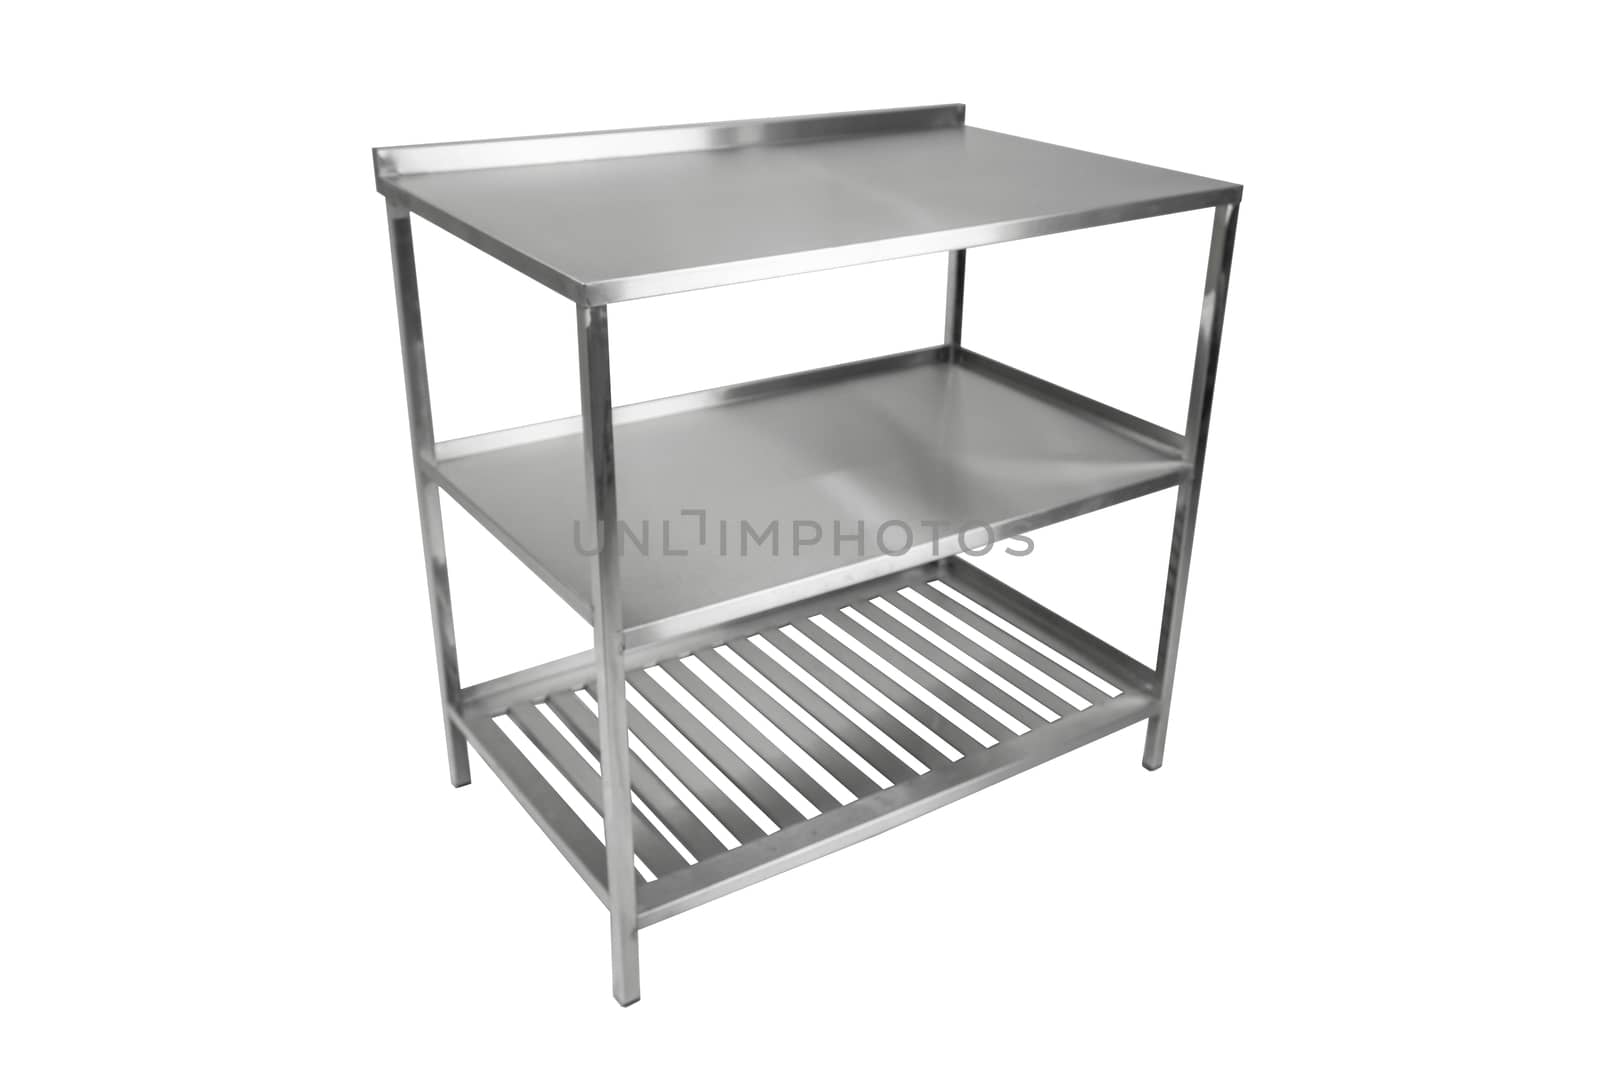 Blurred Table of stainless on isolated white background.